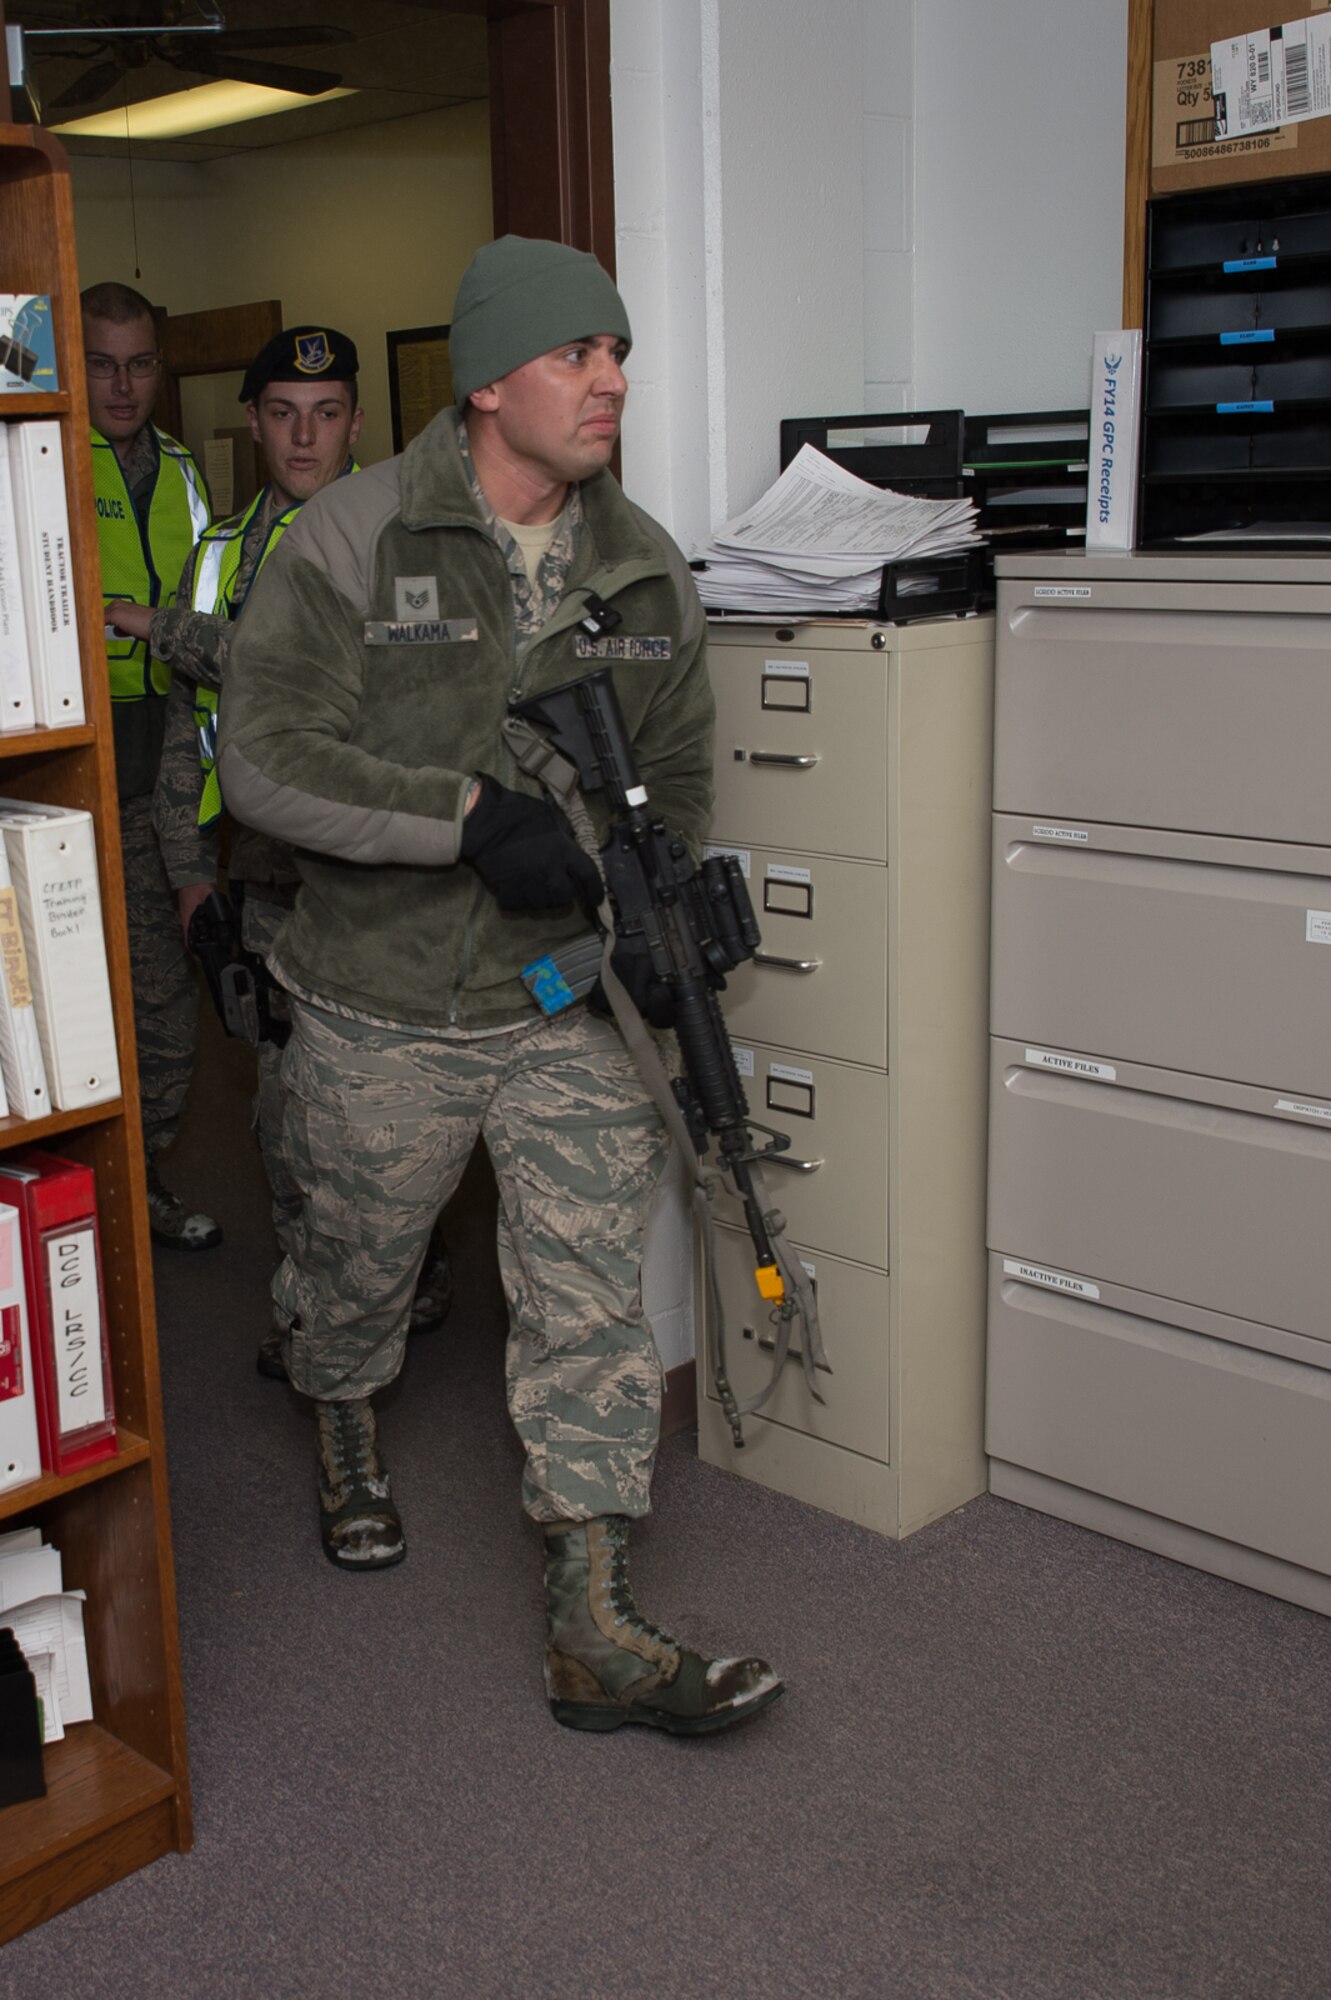 U.S. Air Force Staff Sgt. Chance Walkama, 153rd Security Forces Squadron, walks through a doorway, Dec. 18, 2015 at Cheyenne Air National Guard base in Cheyenne, Wyoming. Walkama portrayed a lone gunman during an active shooter exercise attempting to fatally wound as many people as possible before being captured or killed. The scenario was in support of memorandum sent by Secretary of the Air Force Deborah James to test lockdown and active shooter procedures in response to shootings in Chattanooga, Tenn. (U.S. Air National Guard photo by Master Sgt. Charles Delano)